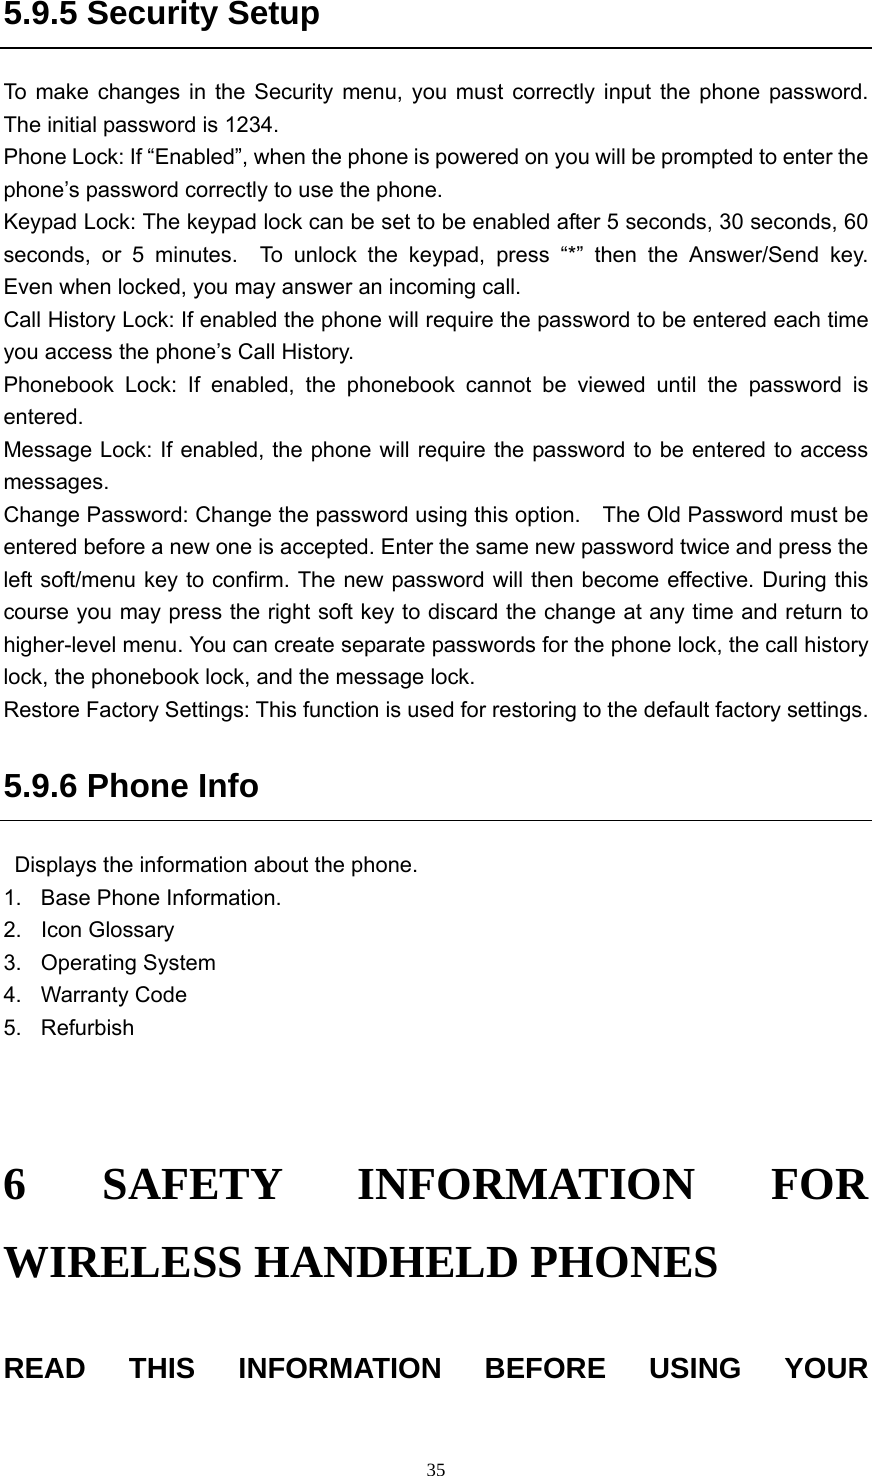  355.9.5 Security Setup To make changes in the Security menu, you must correctly input the phone password.  The initial password is 1234. Phone Lock: If “Enabled”, when the phone is powered on you will be prompted to enter the phone’s password correctly to use the phone.   Keypad Lock: The keypad lock can be set to be enabled after 5 seconds, 30 seconds, 60 seconds, or 5 minutes.  To unlock the keypad, press “*” then the Answer/Send key.  Even when locked, you may answer an incoming call. Call History Lock: If enabled the phone will require the password to be entered each time you access the phone’s Call History. Phonebook Lock: If enabled, the phonebook cannot be viewed until the password is entered. Message Lock: If enabled, the phone will require the password to be entered to access messages.   Change Password: Change the password using this option.    The Old Password must be entered before a new one is accepted. Enter the same new password twice and press the left soft/menu key to confirm. The new password will then become effective. During this course you may press the right soft key to discard the change at any time and return to higher-level menu. You can create separate passwords for the phone lock, the call history lock, the phonebook lock, and the message lock. Restore Factory Settings: This function is used for restoring to the default factory settings. 5.9.6 Phone Info   Displays the information about the phone.   1.  Base Phone Information. 2. Icon Glossary  3. Operating System 4. Warranty Code 5. Refurbish   6 SAFETY INFORMATION FOR WIRELESS HANDHELD PHONES READ THIS INFORMATION BEFORE USING YOUR 